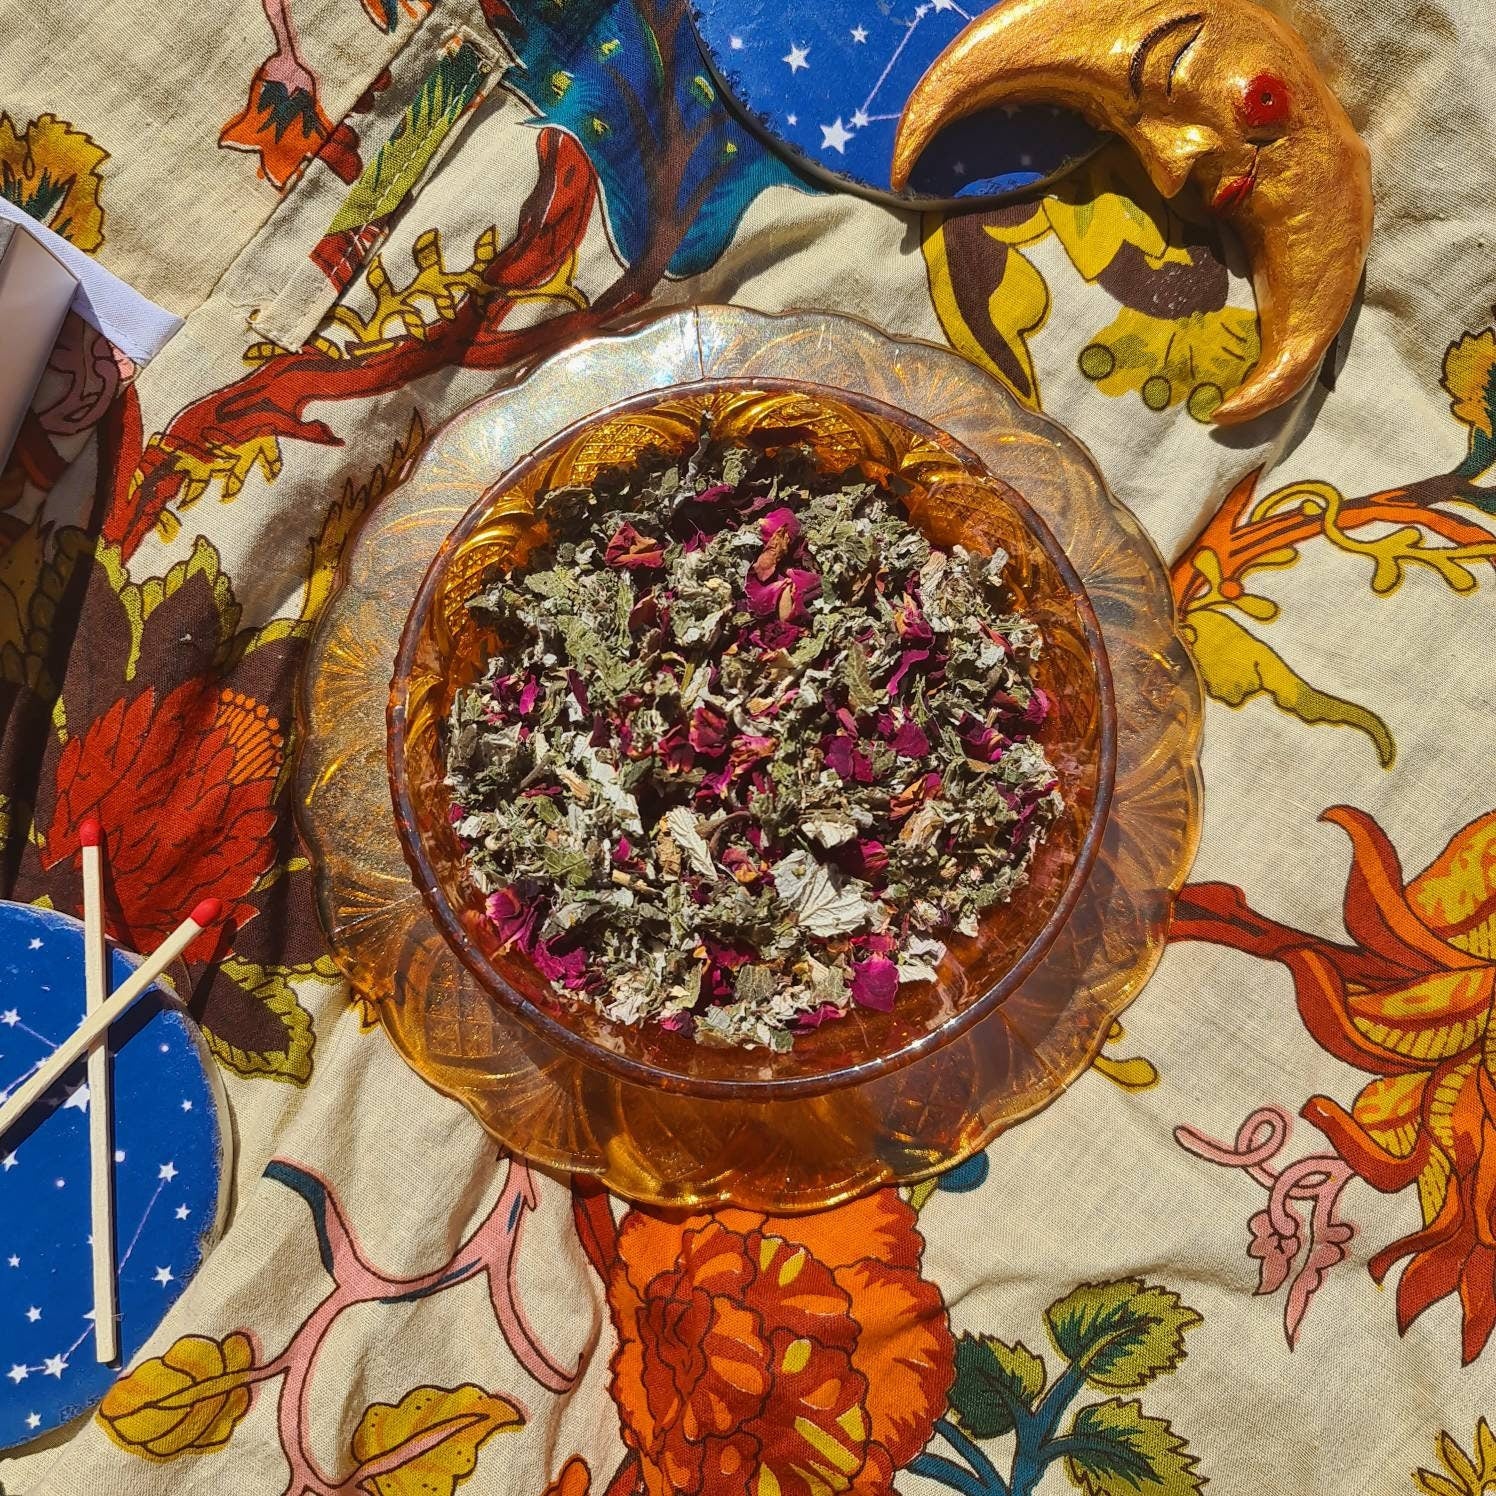 An enchanting image of The Dreamy Blend in a carnival glass bowl showcasing a blend of green raspberry leaf, mugwort, rose petals, and lavender. A celestial moon decoration with twinkling stars adorns the background, adding a touch of magic.